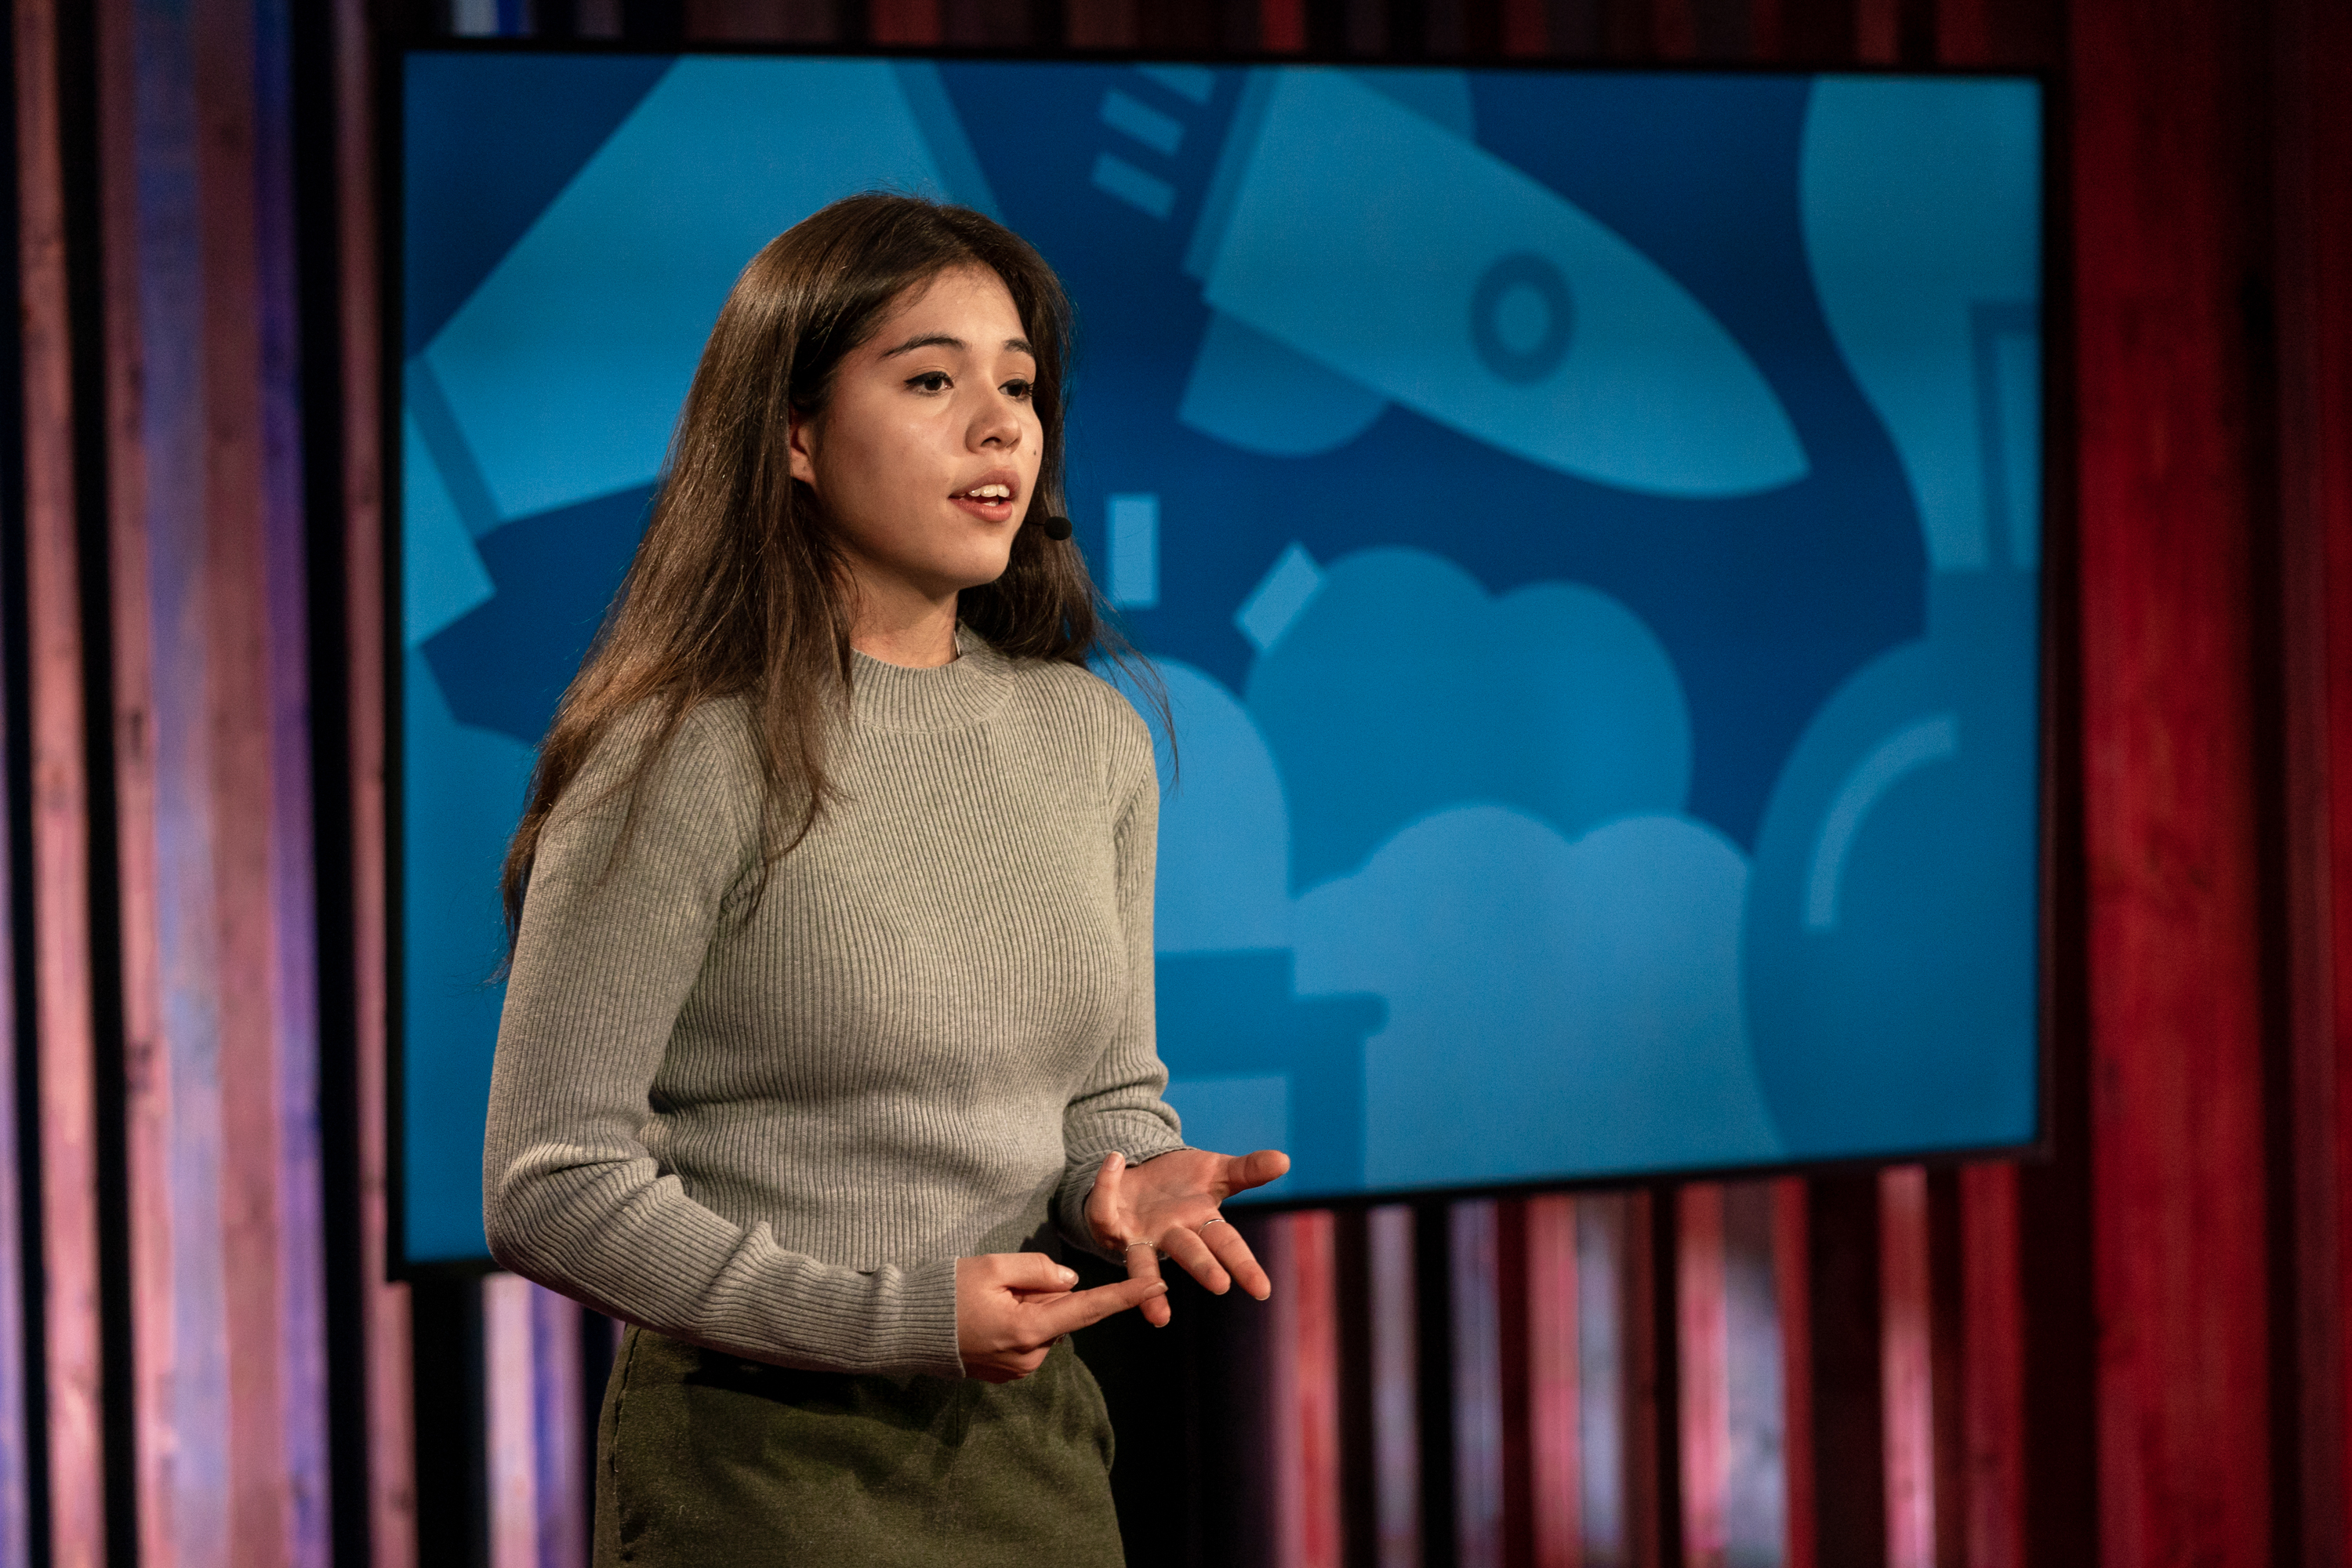 Xiye Bastida, Indigenous teenage climate activist is working to make the climate movement more accessible to all.